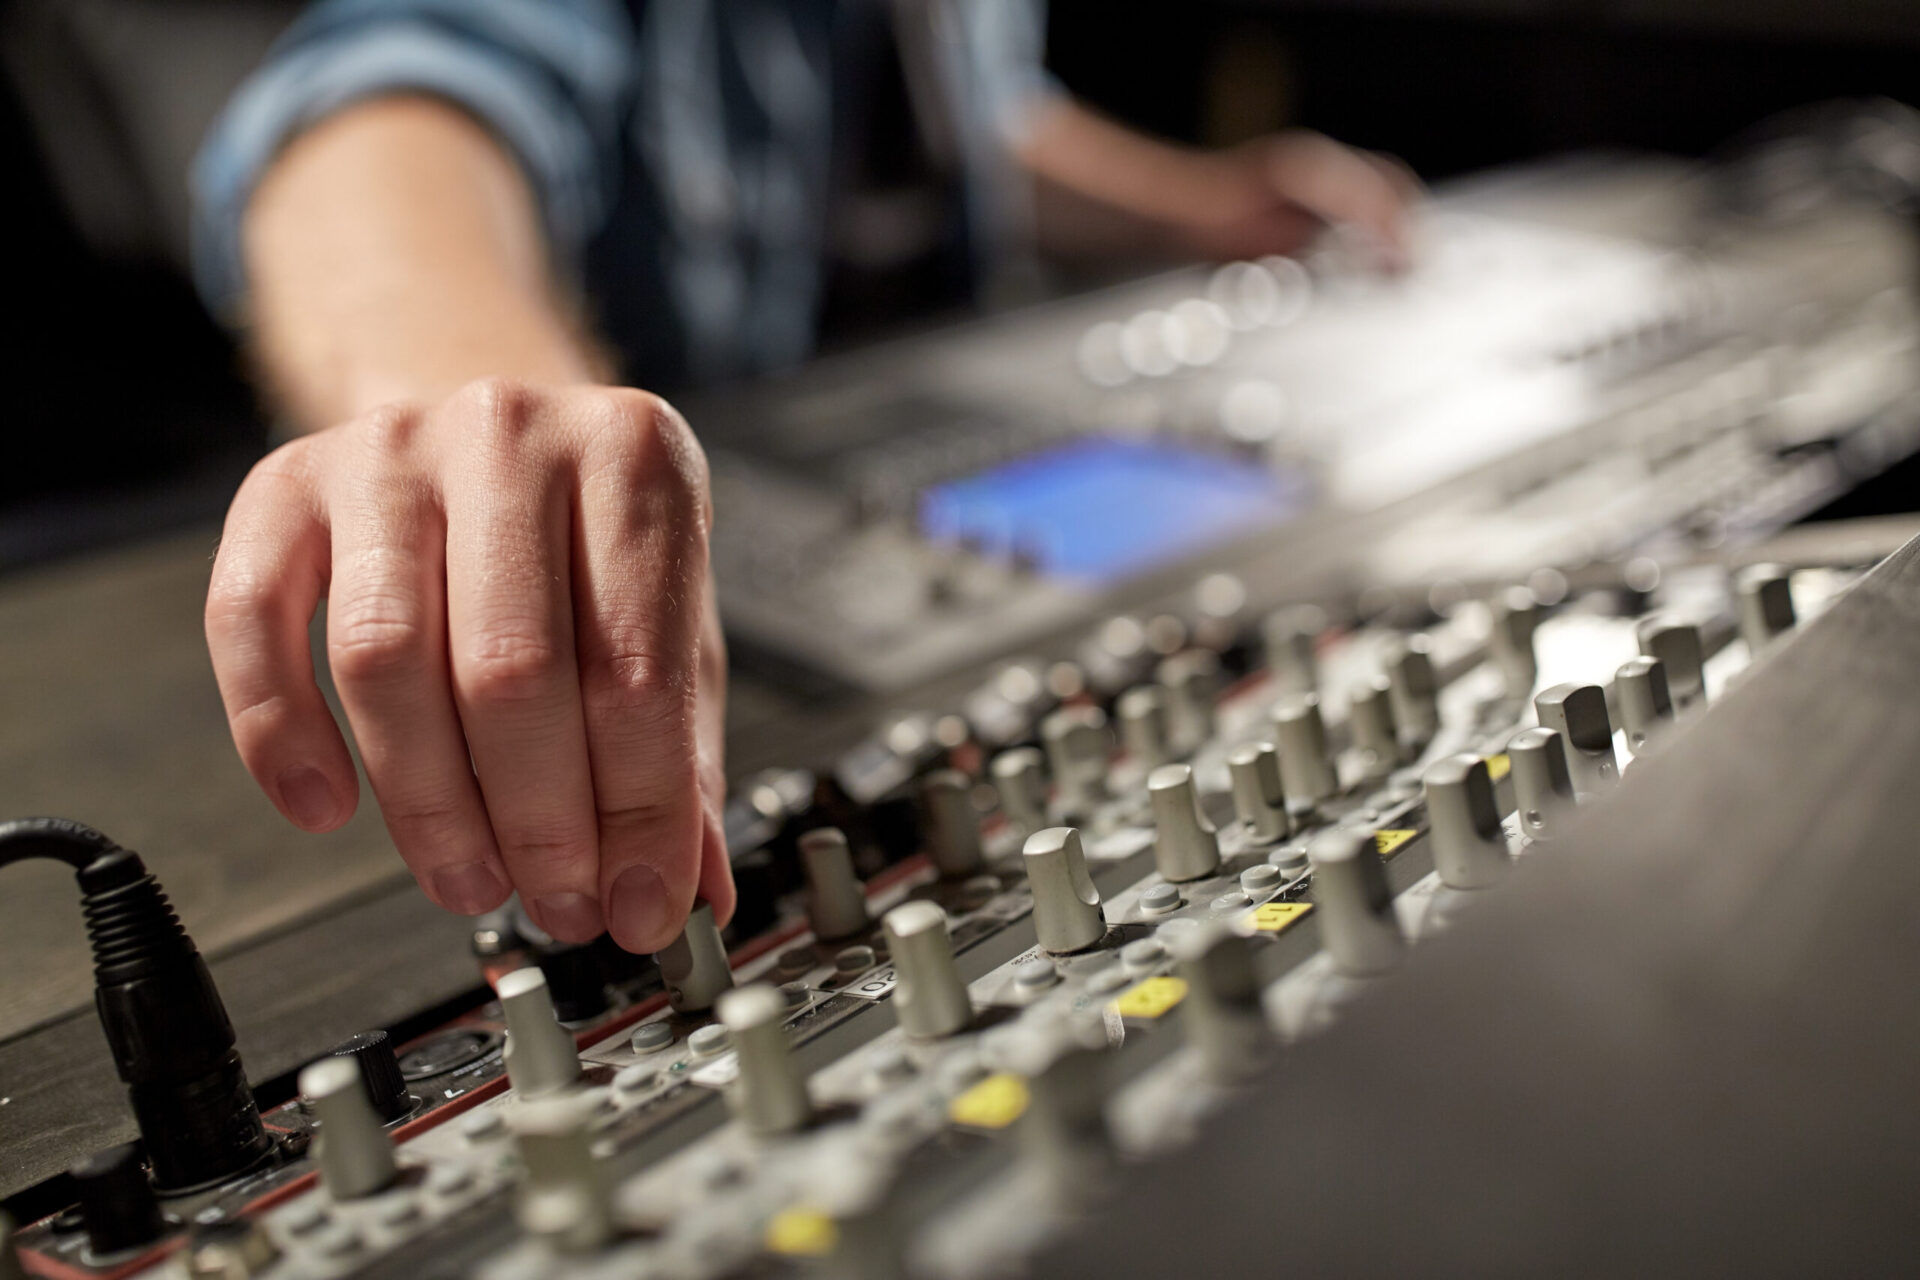 A person's hand is touching a mixing board while demo recording.